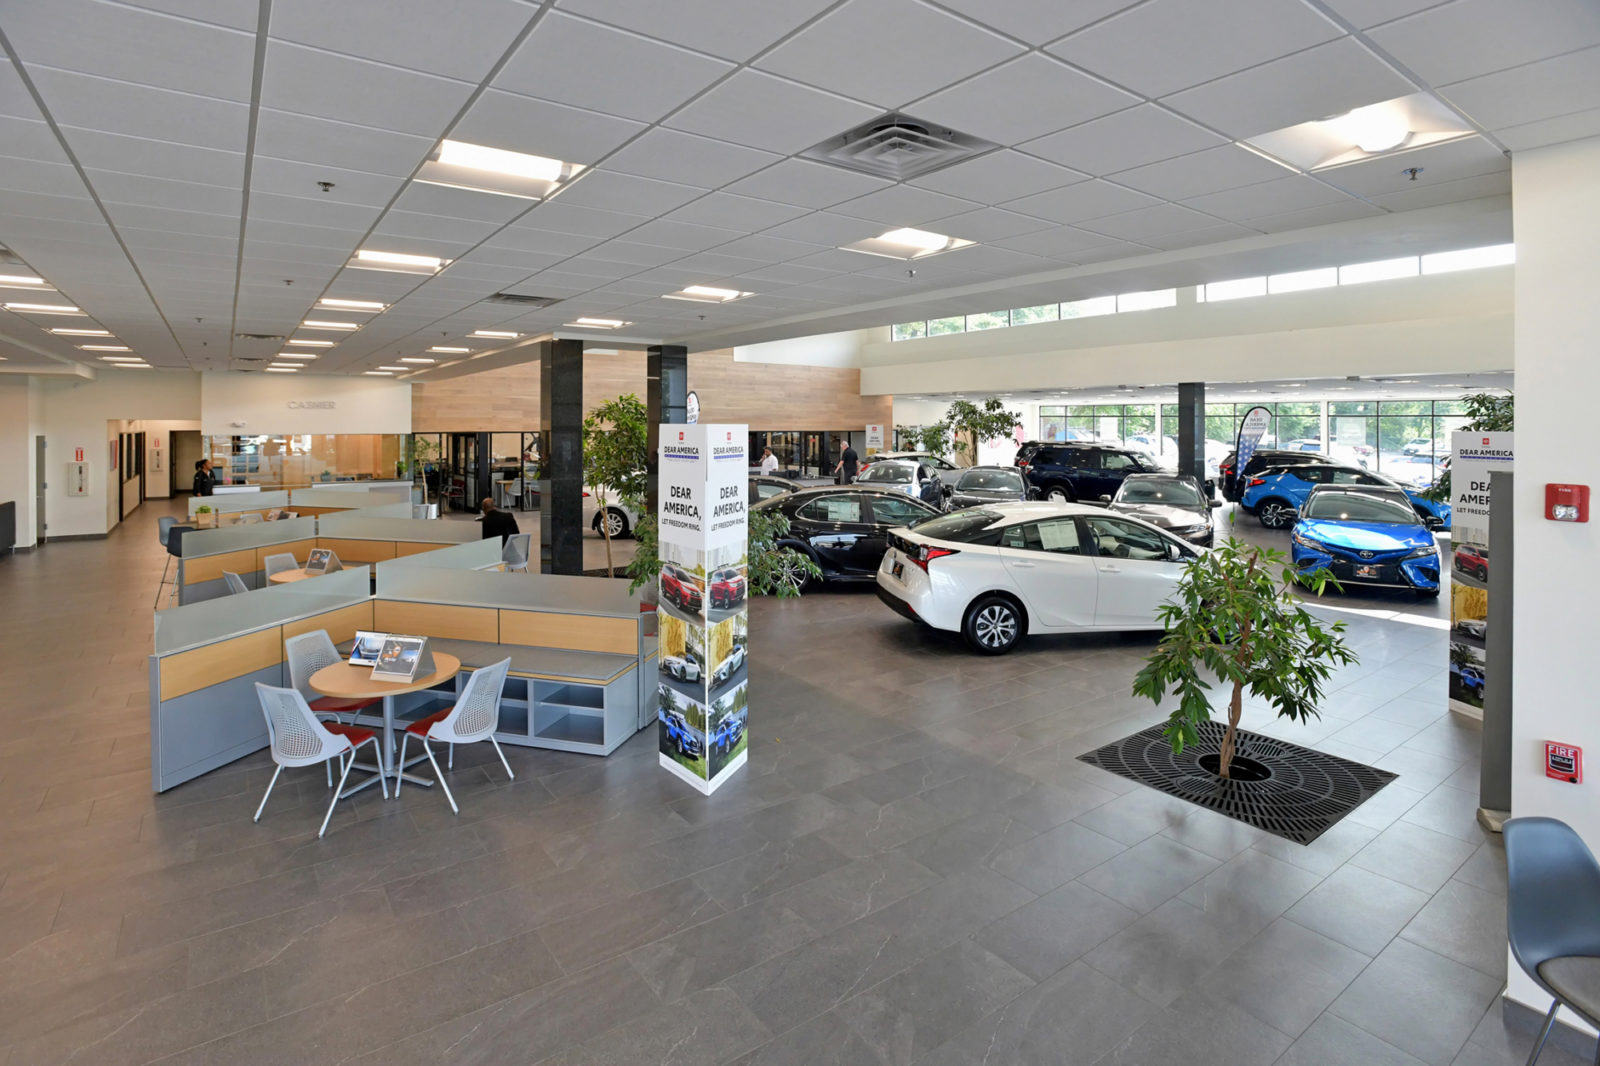 Car showroom showing a line of Herman Miller Canvas workstations and seating on the left side. Showroom cars are along right side of picture.